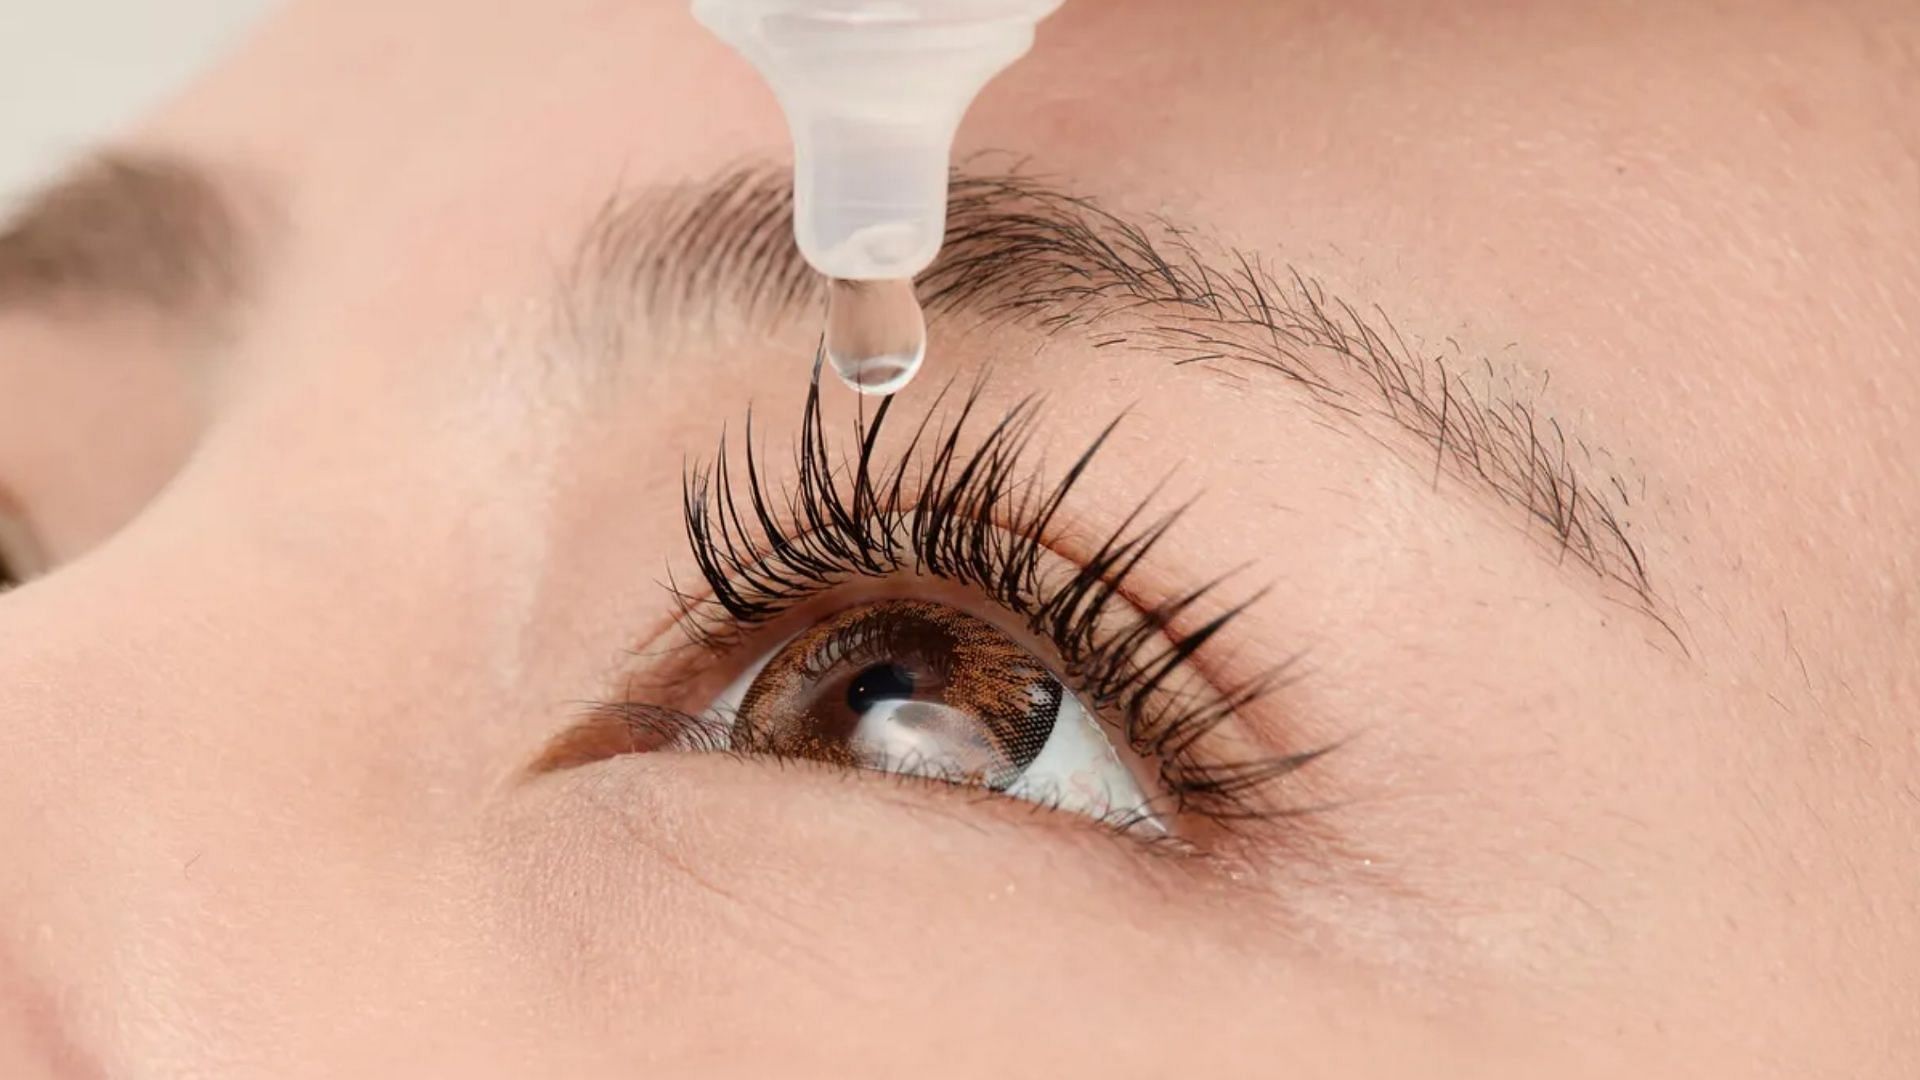 Dr. Berne&#039;s Whole Health Products recalled the contaminated eye drop products this week (Image via Yoshiyoshi Hirokawa / Getty Images)